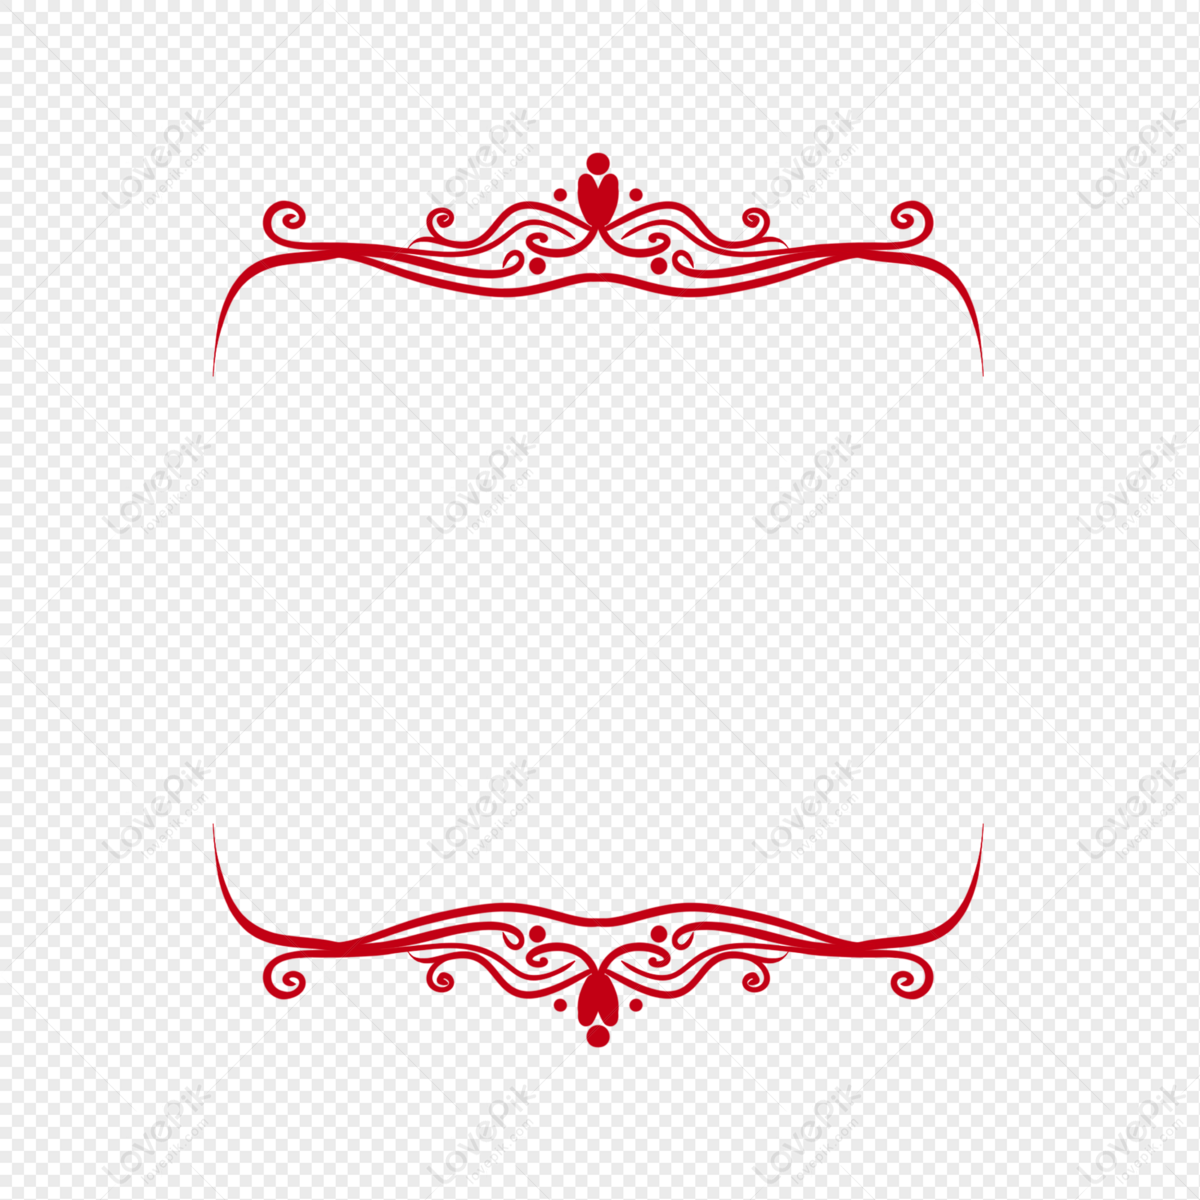 Red Pattern Decorative Border PNG Picture And Clipart Image For ...